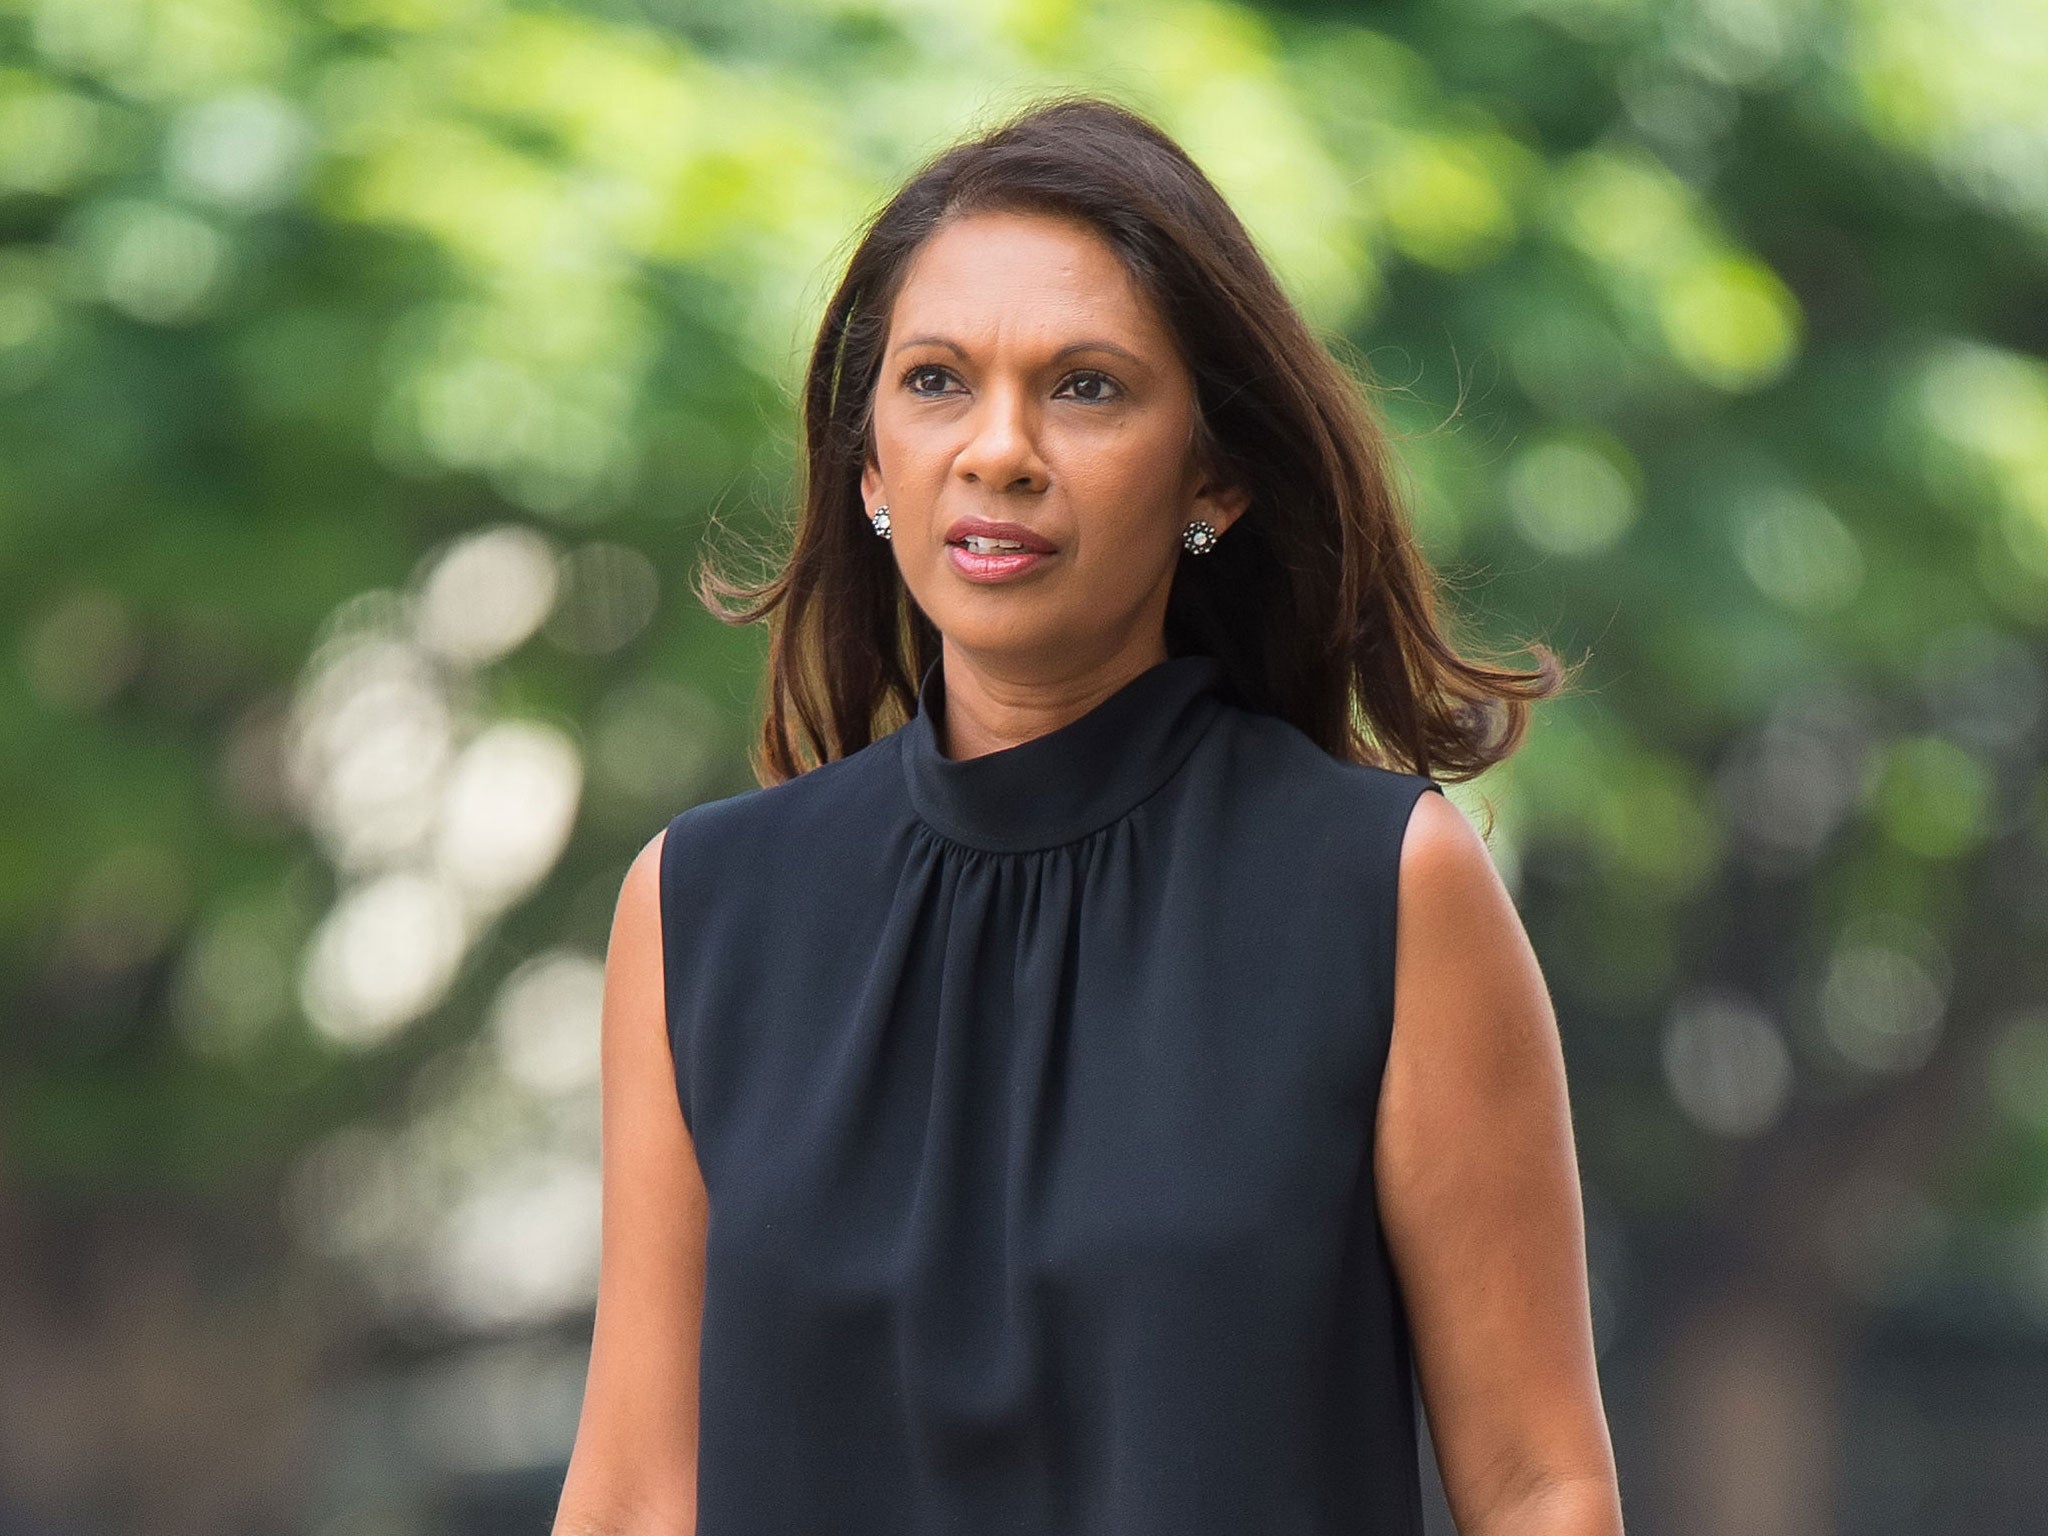 Gina Miller launched the legal case, arguing the government could not invoke Article 50 of the Lisbon Treaty - starting the formal process of the UK leaving the EU - without seeking approval from Parliament